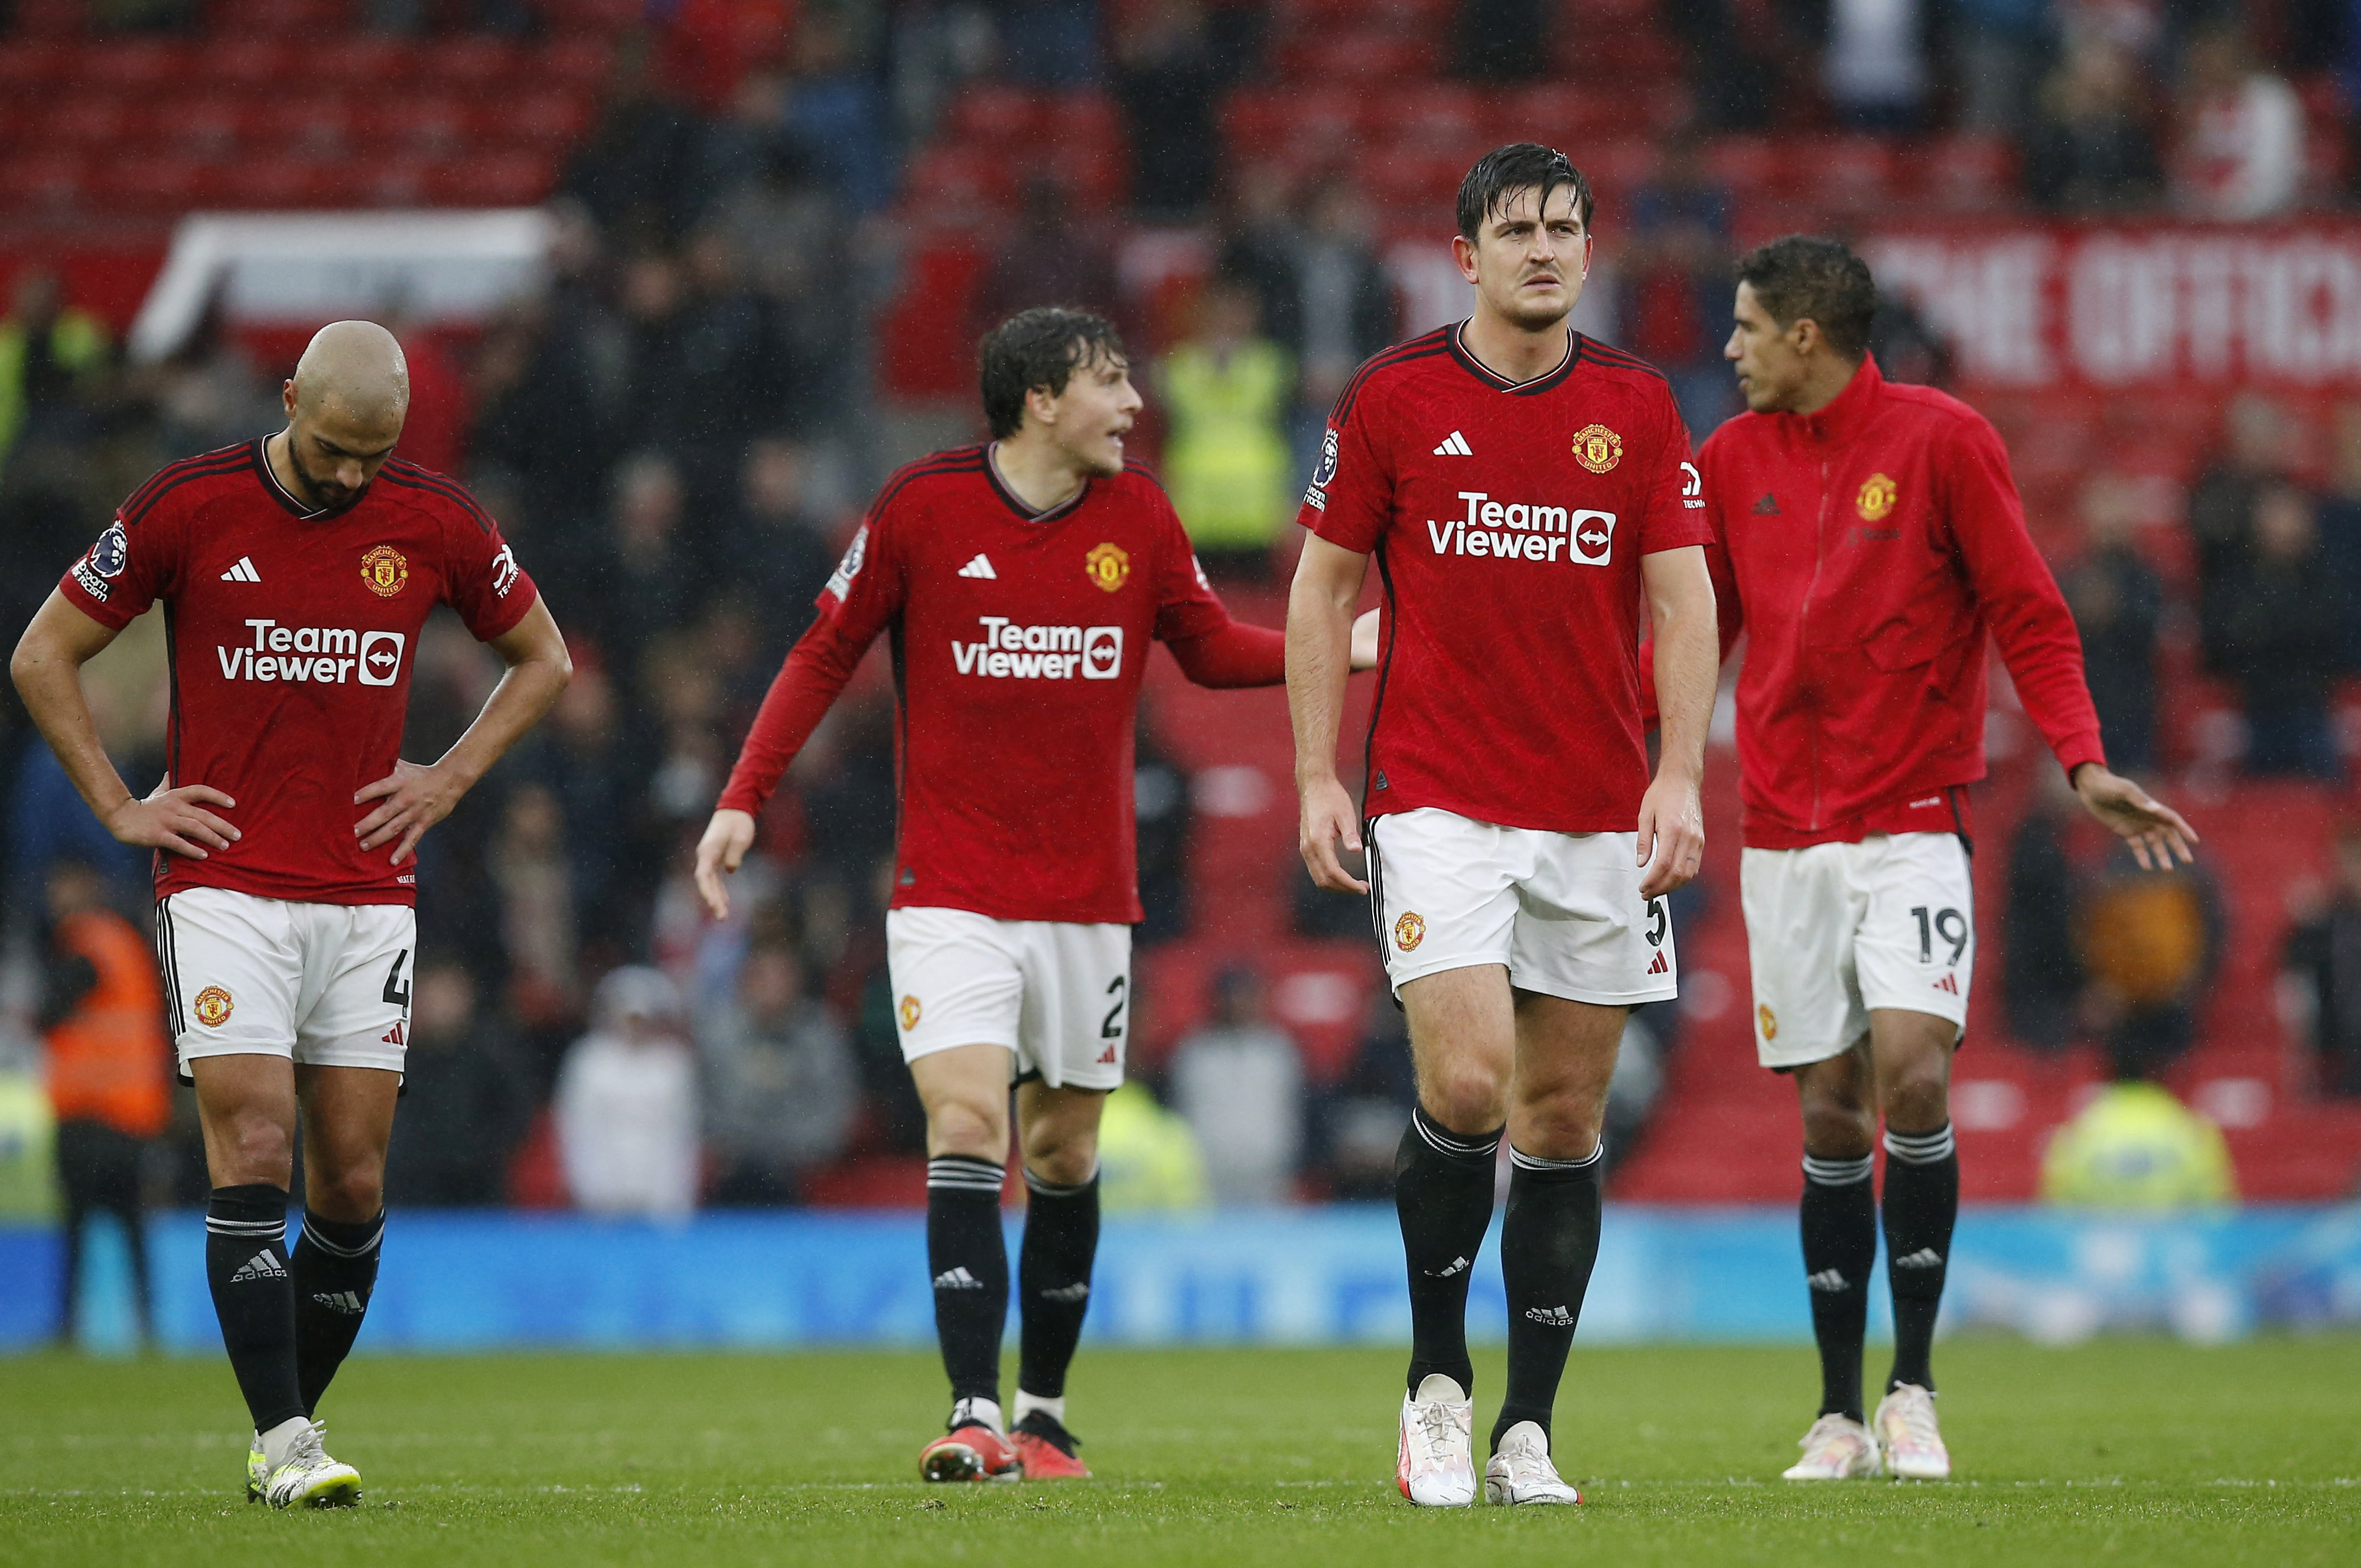 Man United frustrates Liverpool as Arsenal moves back on top of